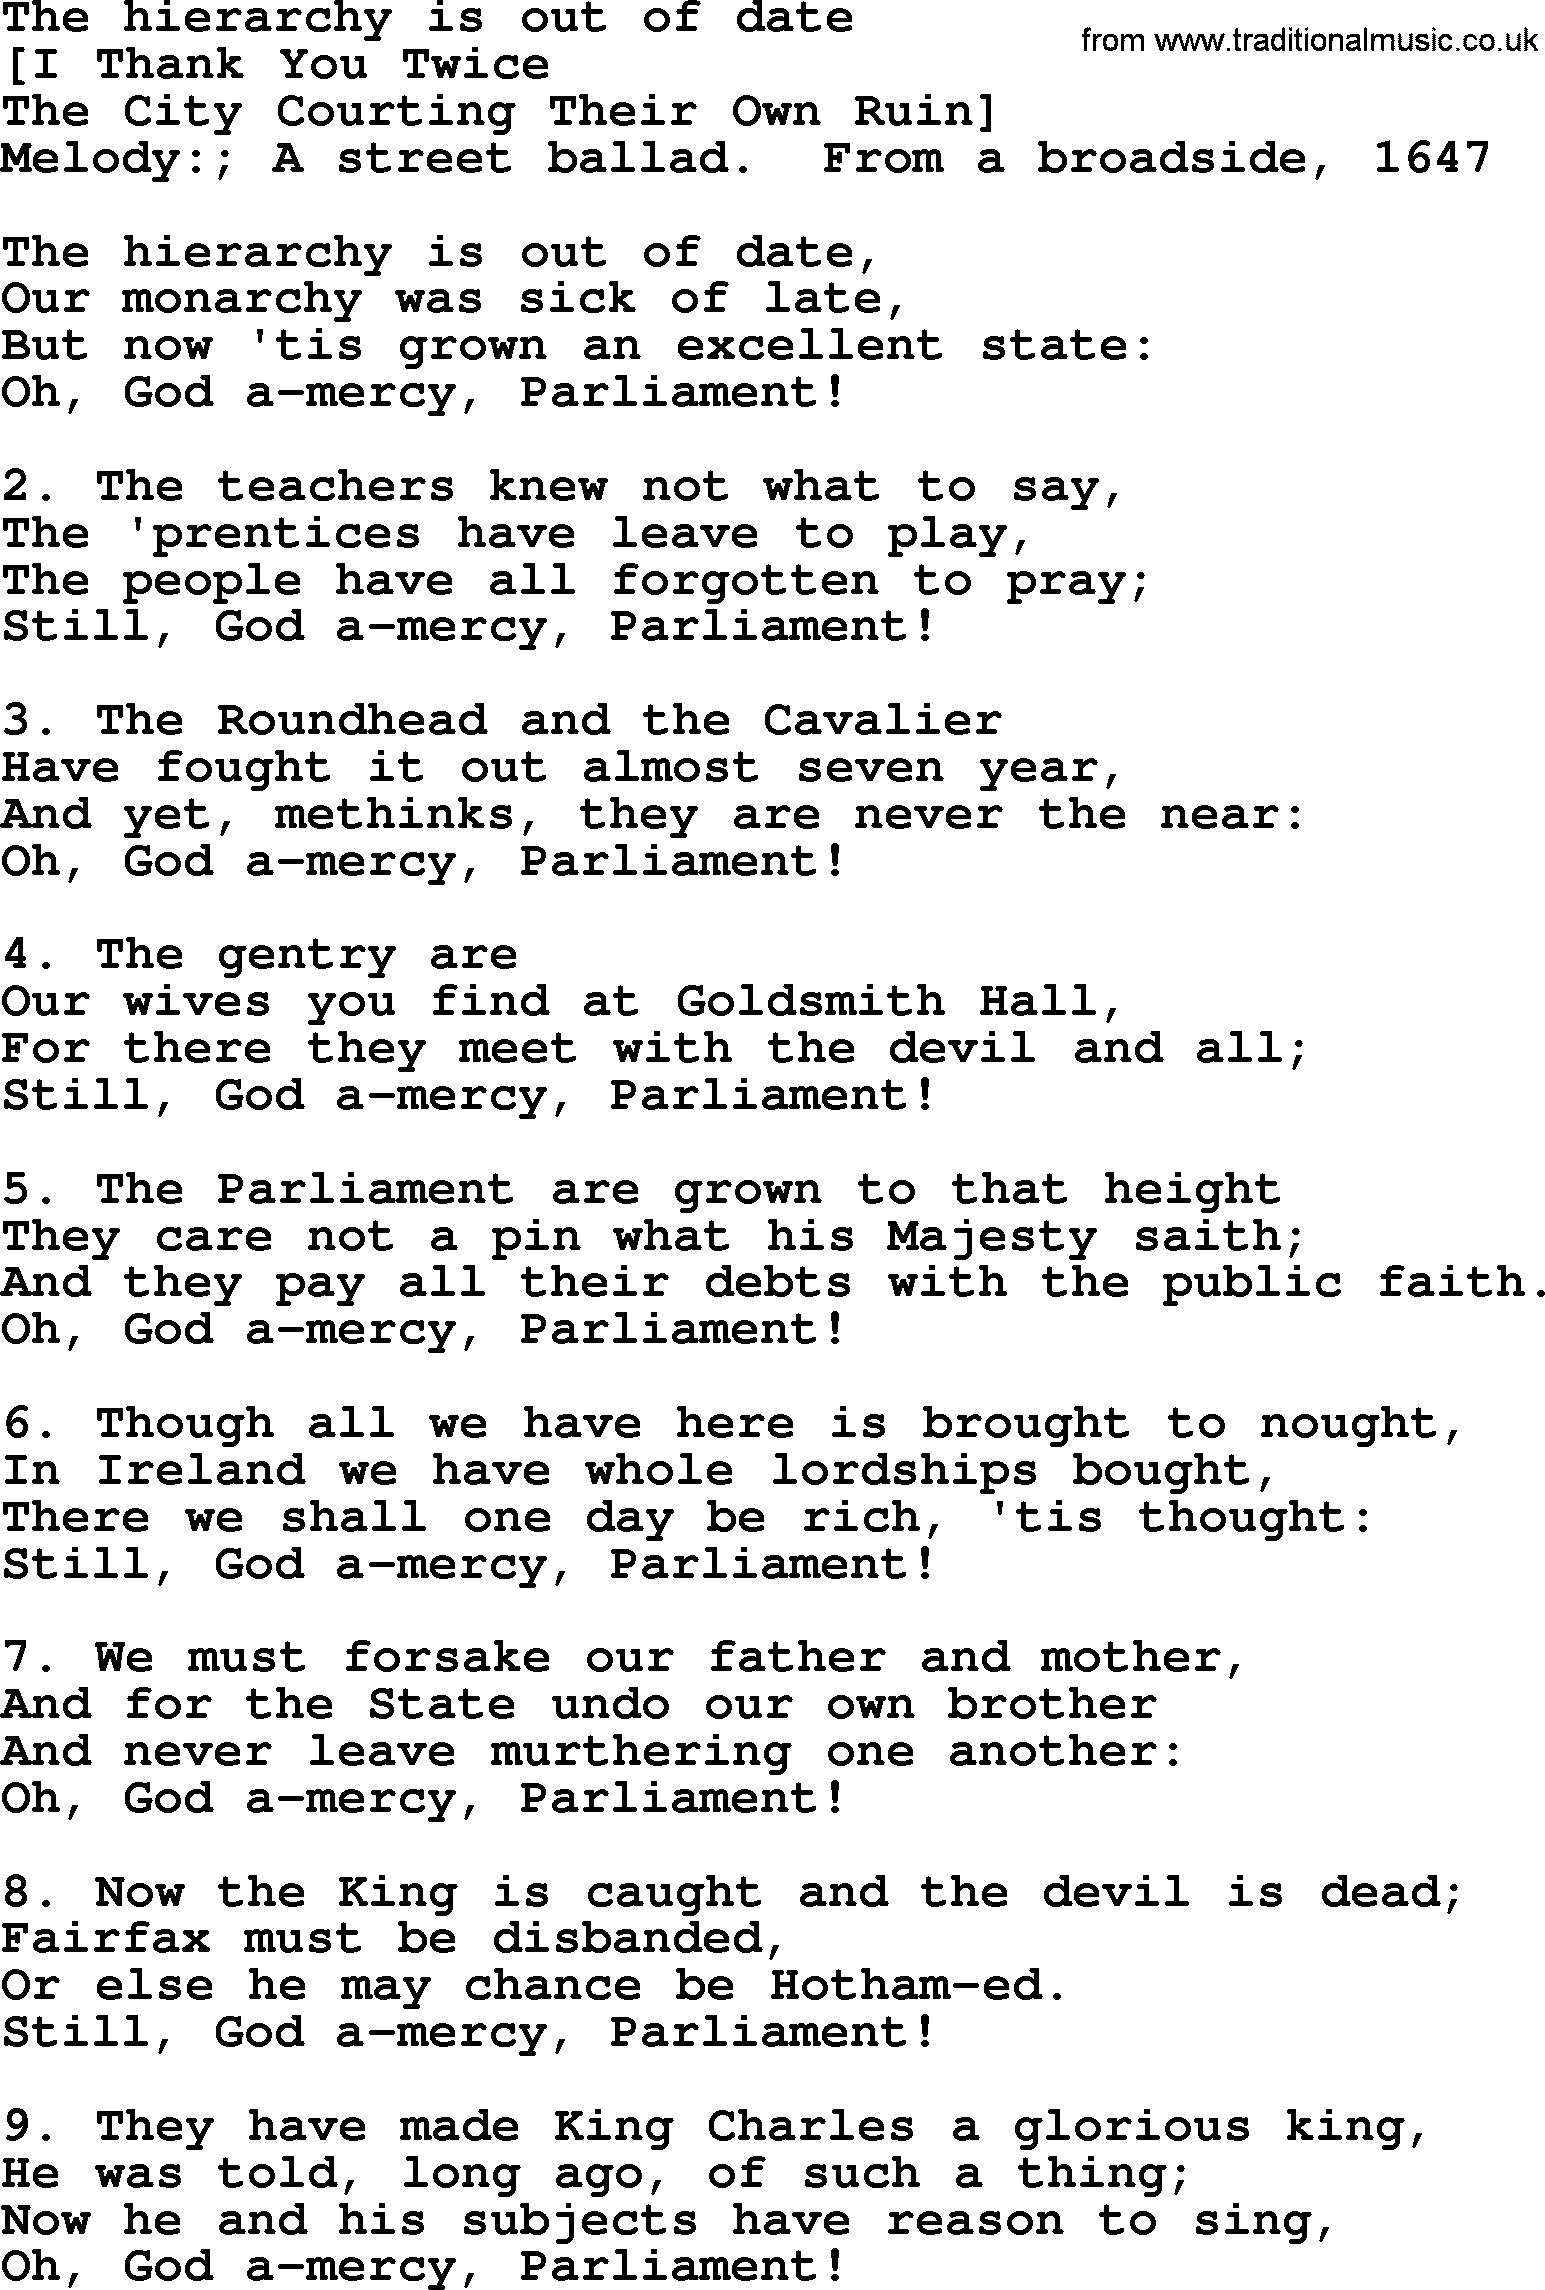 Old English Song: The Hierarchy Is Out Of Date lyrics